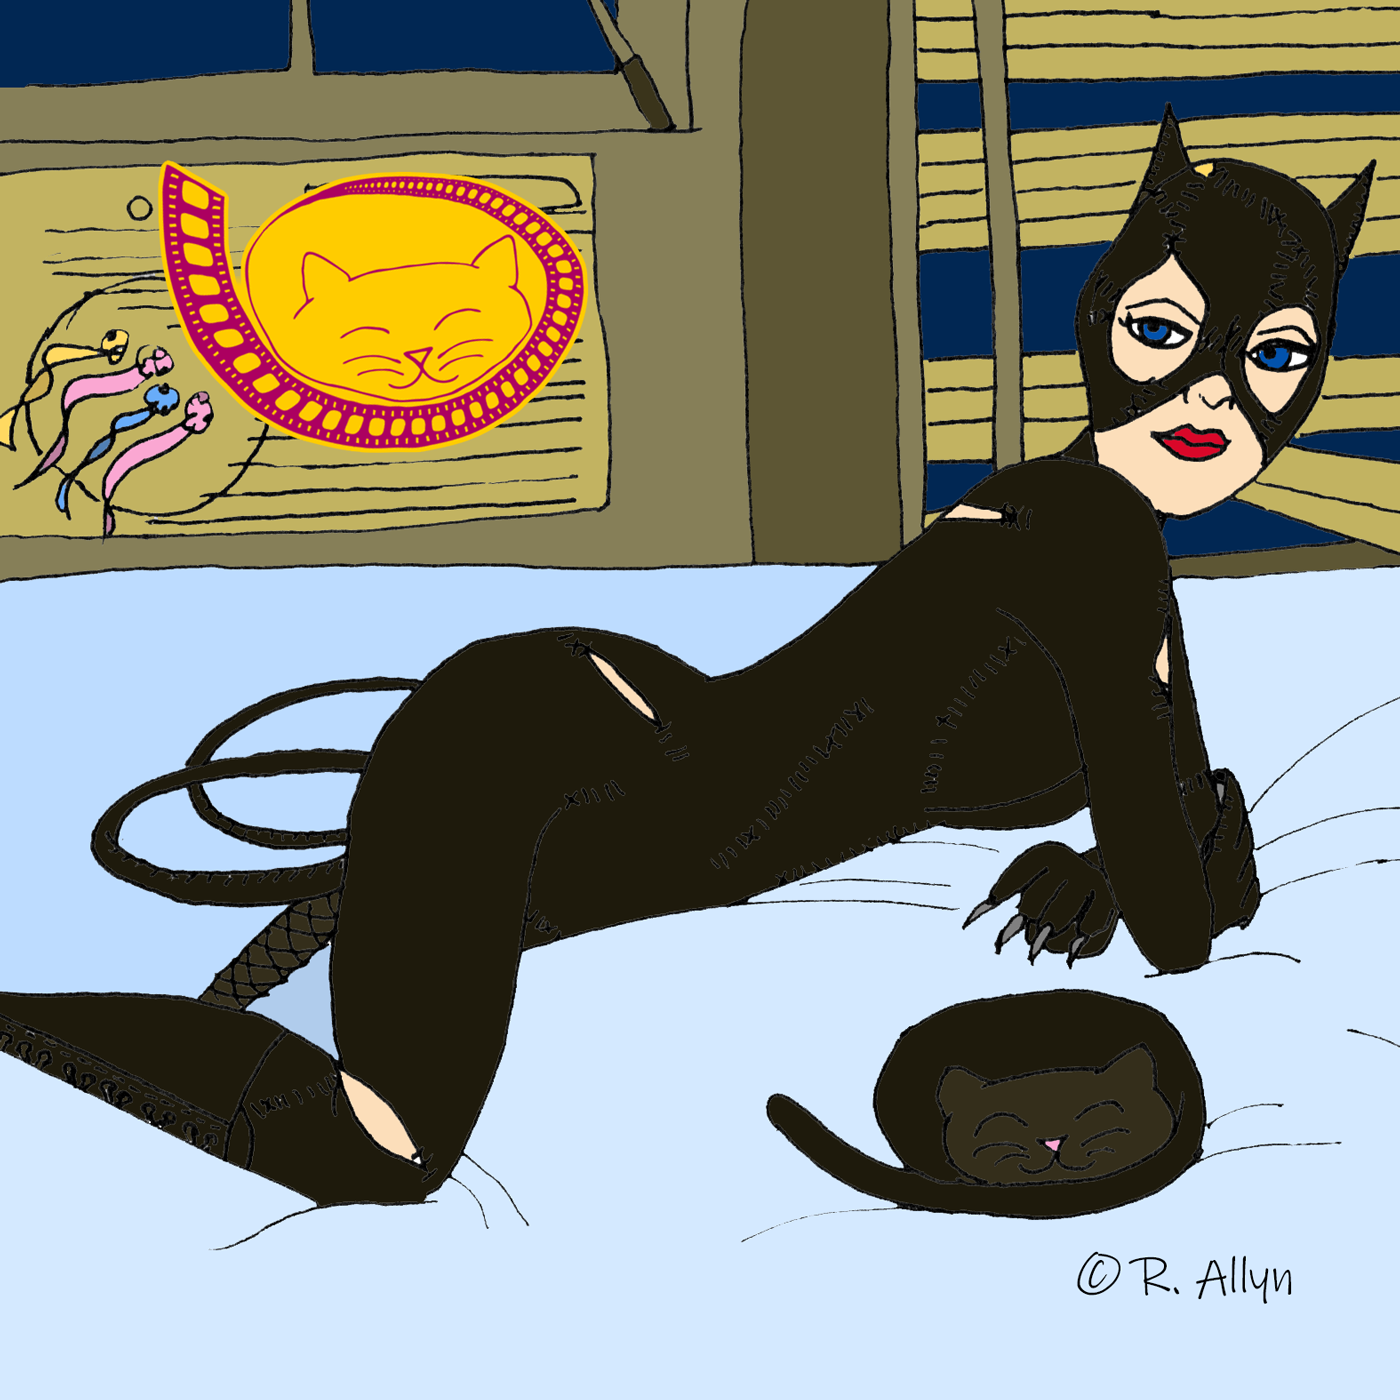 Illustration of Catwoman & Miss Kitty from the movie Batman Returns